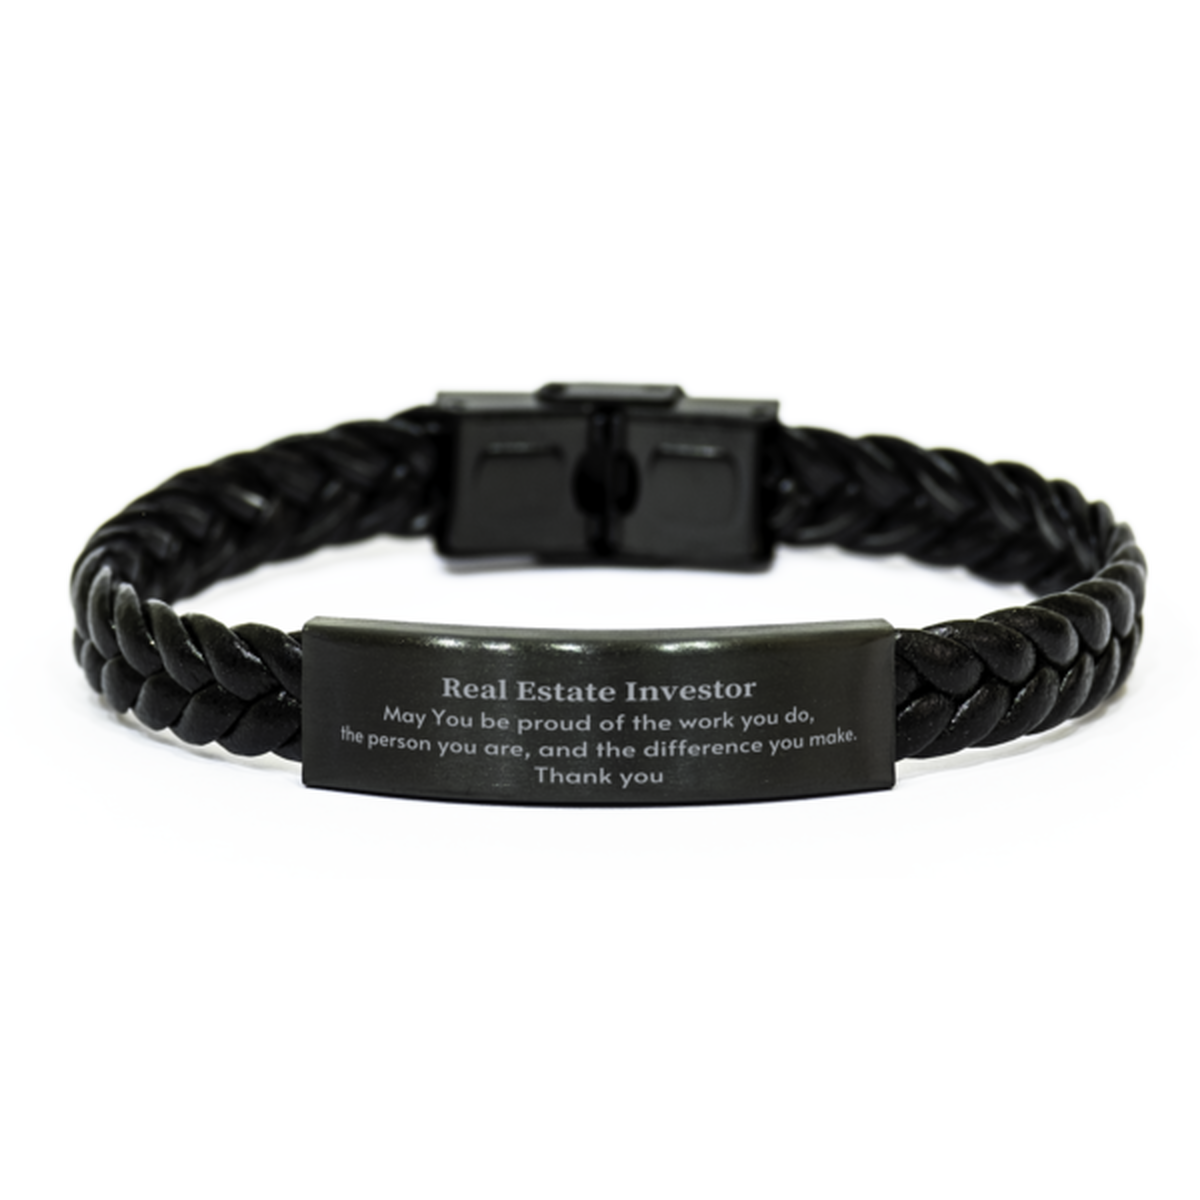 Heartwarming Braided Leather Bracelet Retirement Coworkers Gifts for Real Estate Investor, Real Estate Investor May You be proud of the work you do, the person you are Gifts for Boss Men Women Friends